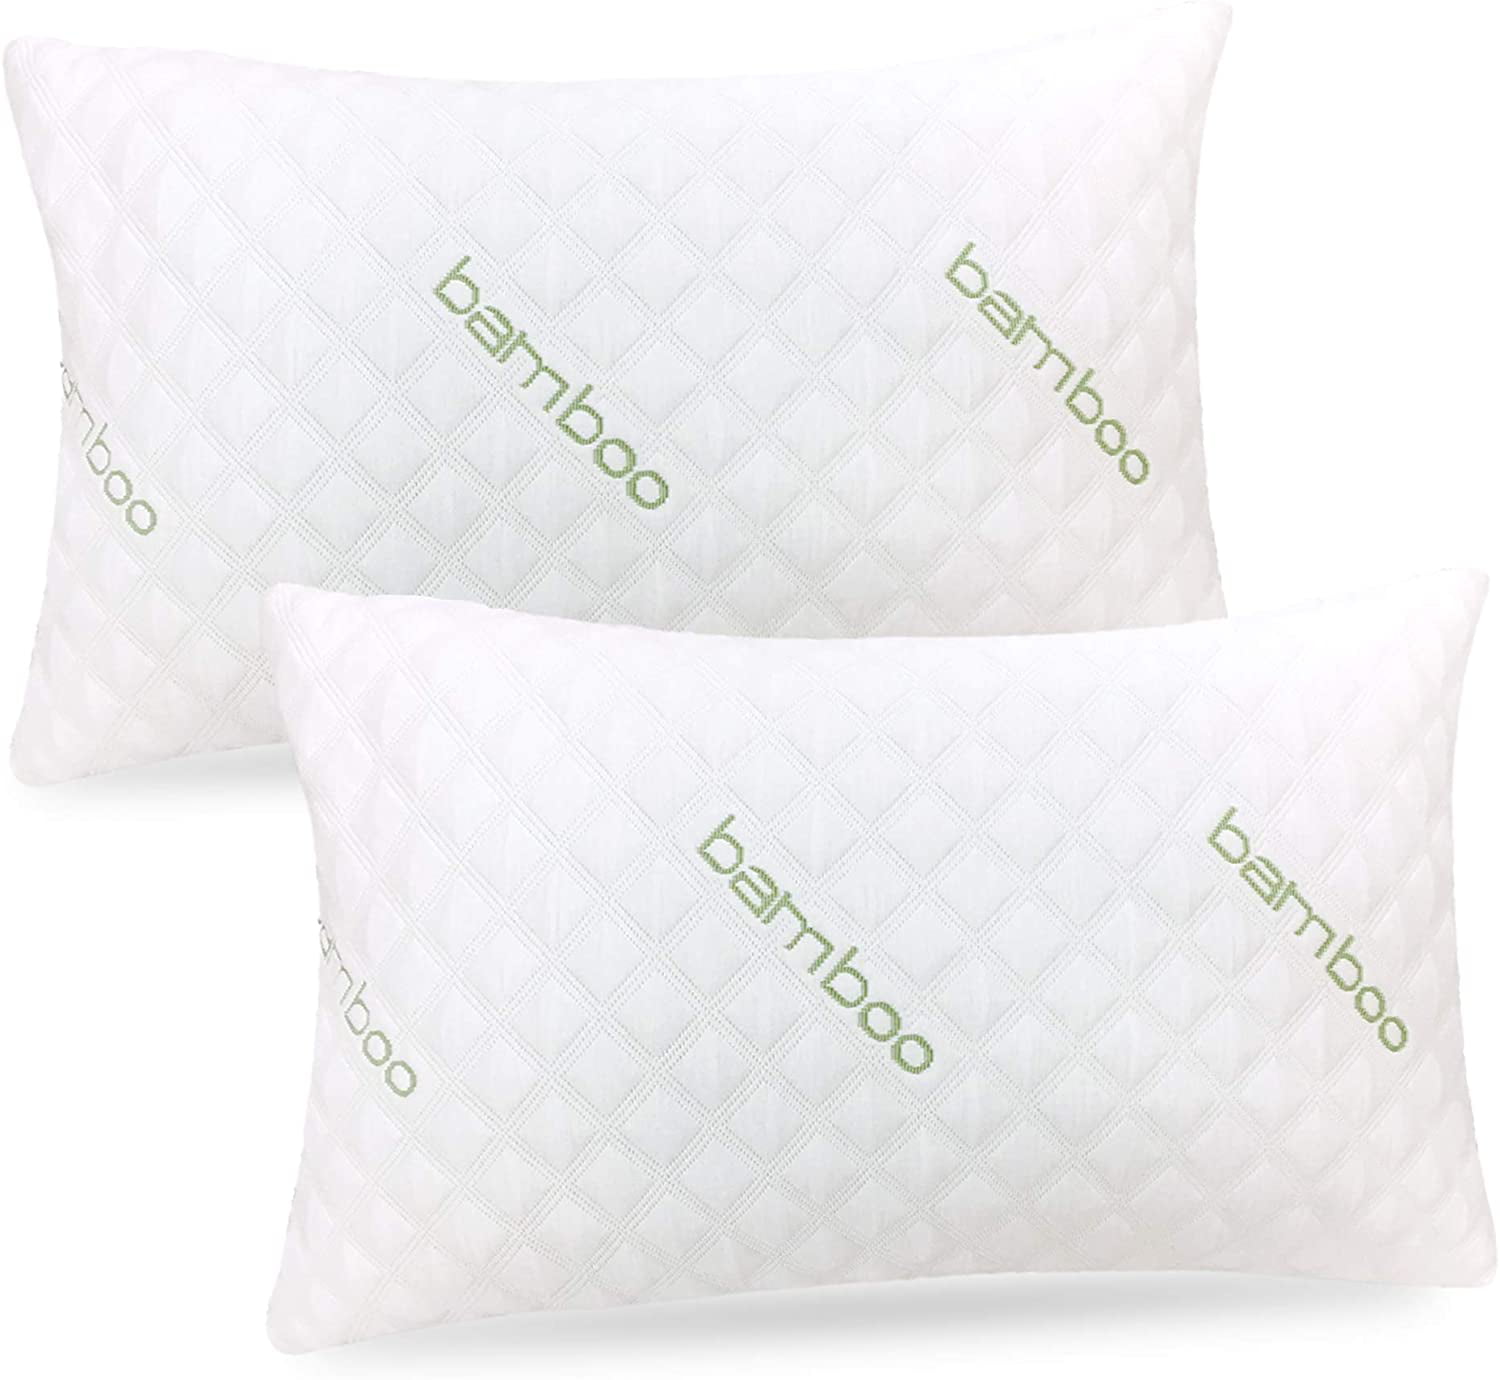 Details about   Luxury V shape Contour,Bamboo Memory Foam Anti-Bacterial Premium Support Pillow 